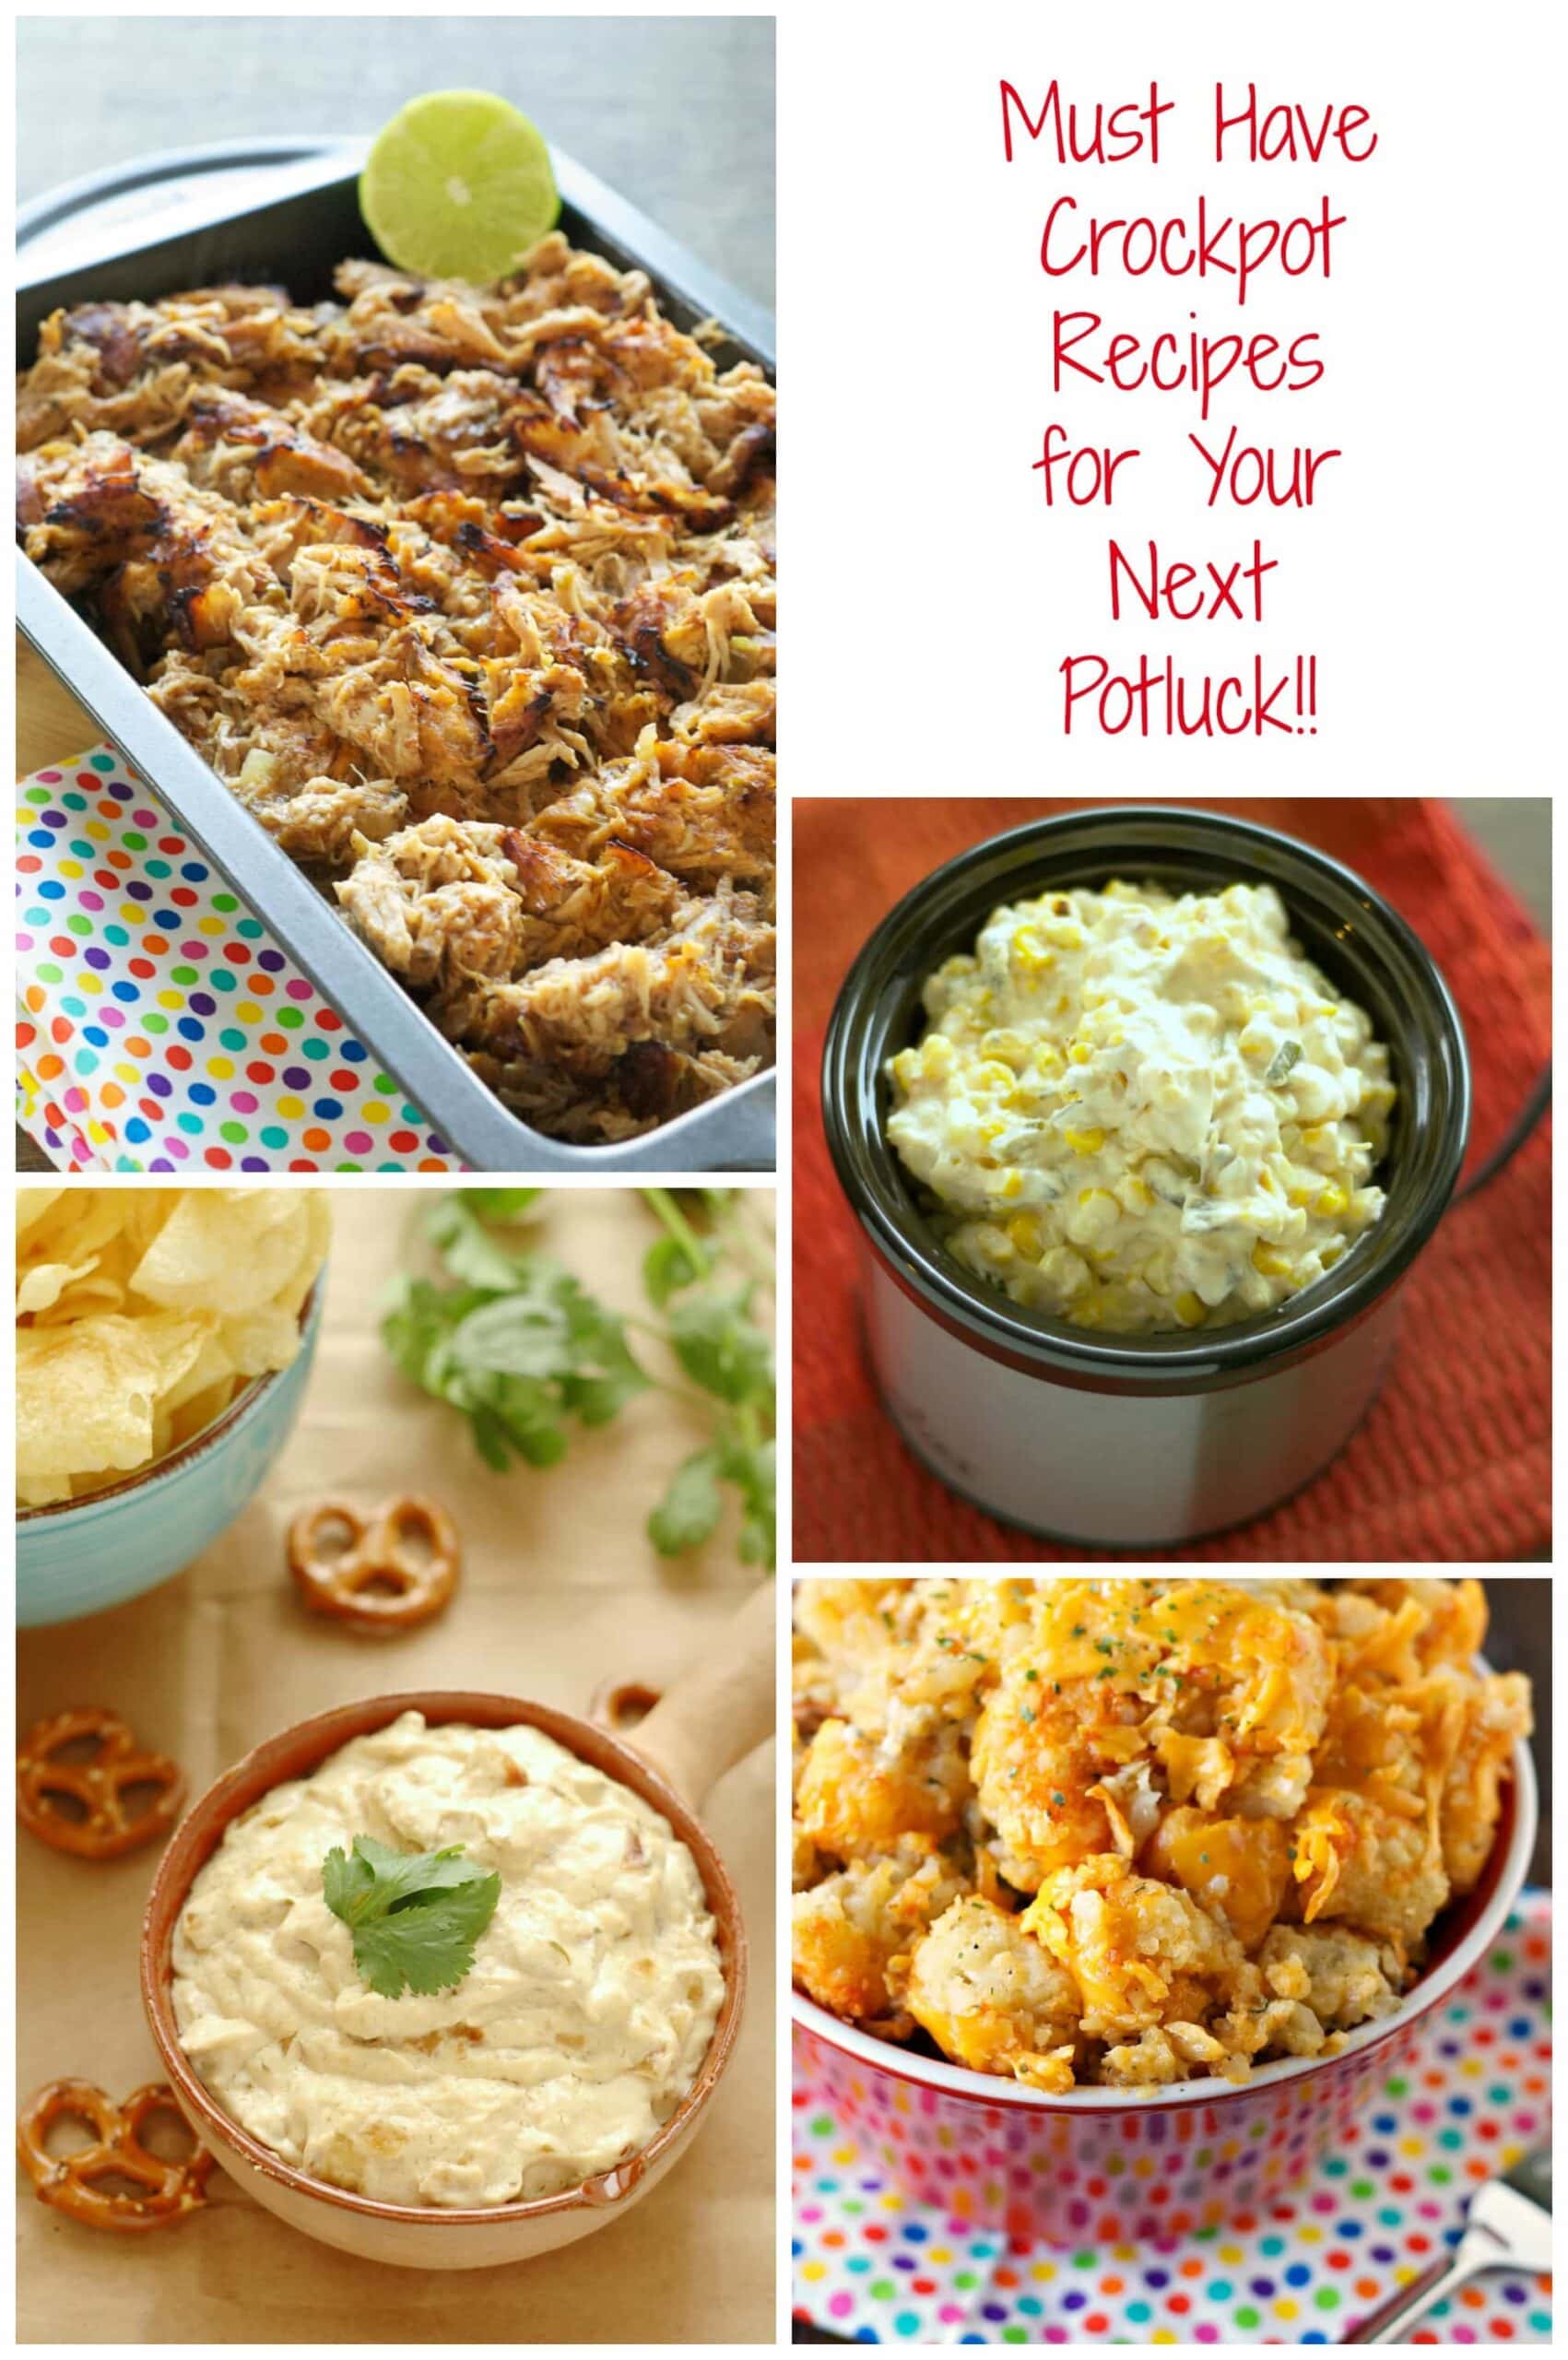 Delicious Slow Cooker Dishes for your Next Potluck!!